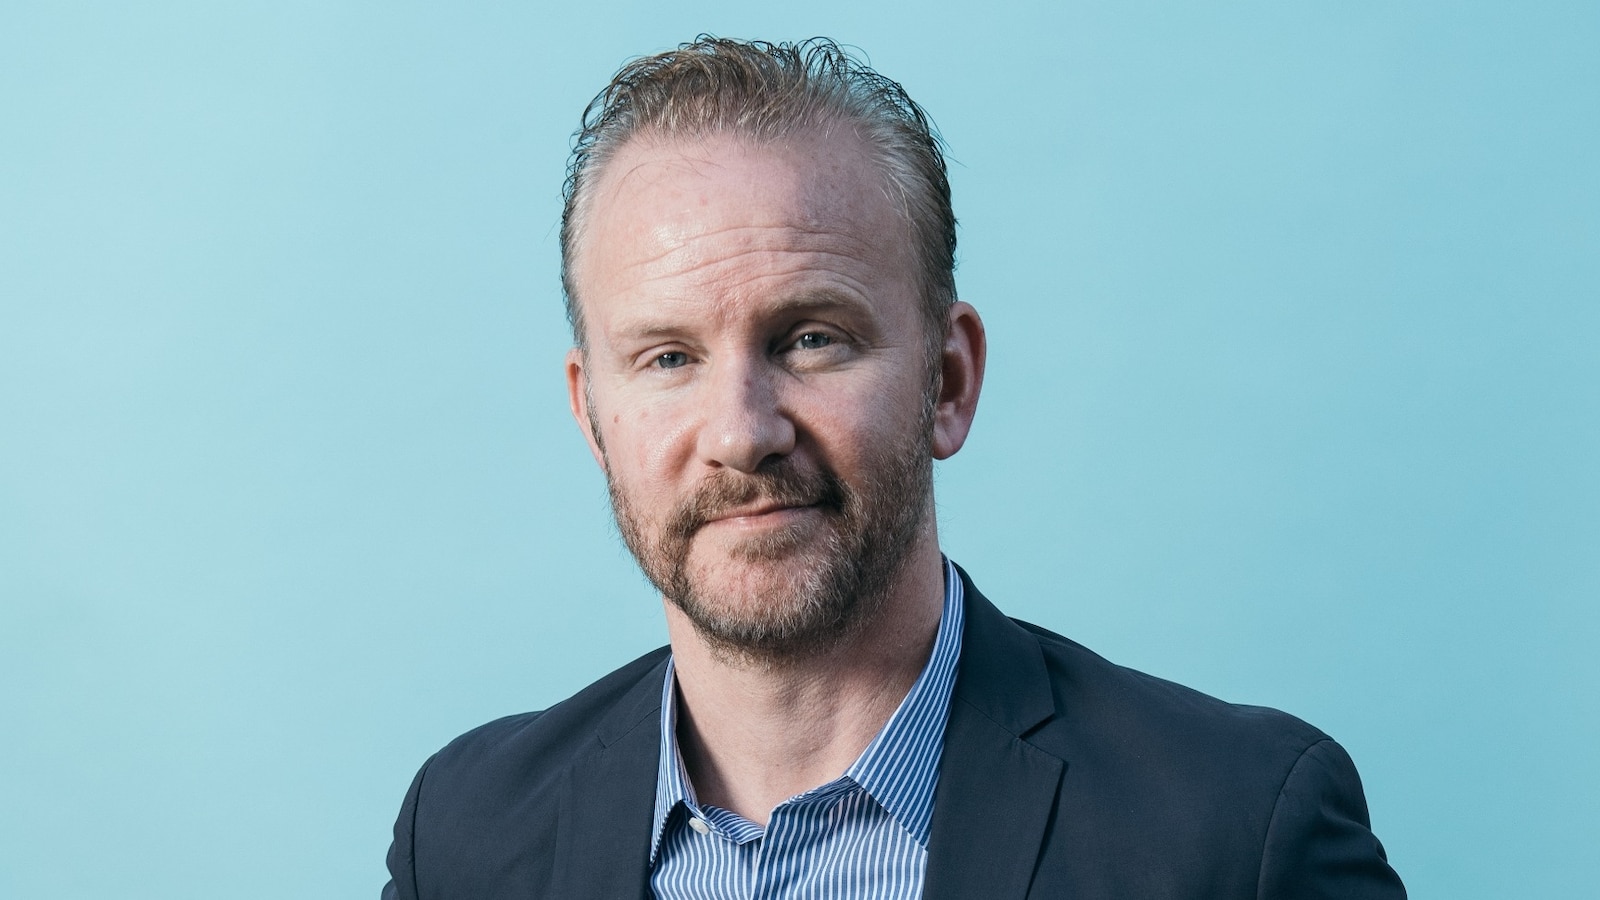 Morgan Spurlock, filmmaker behind ‘Super Size Me’ documentary, dies from cancer [Video]